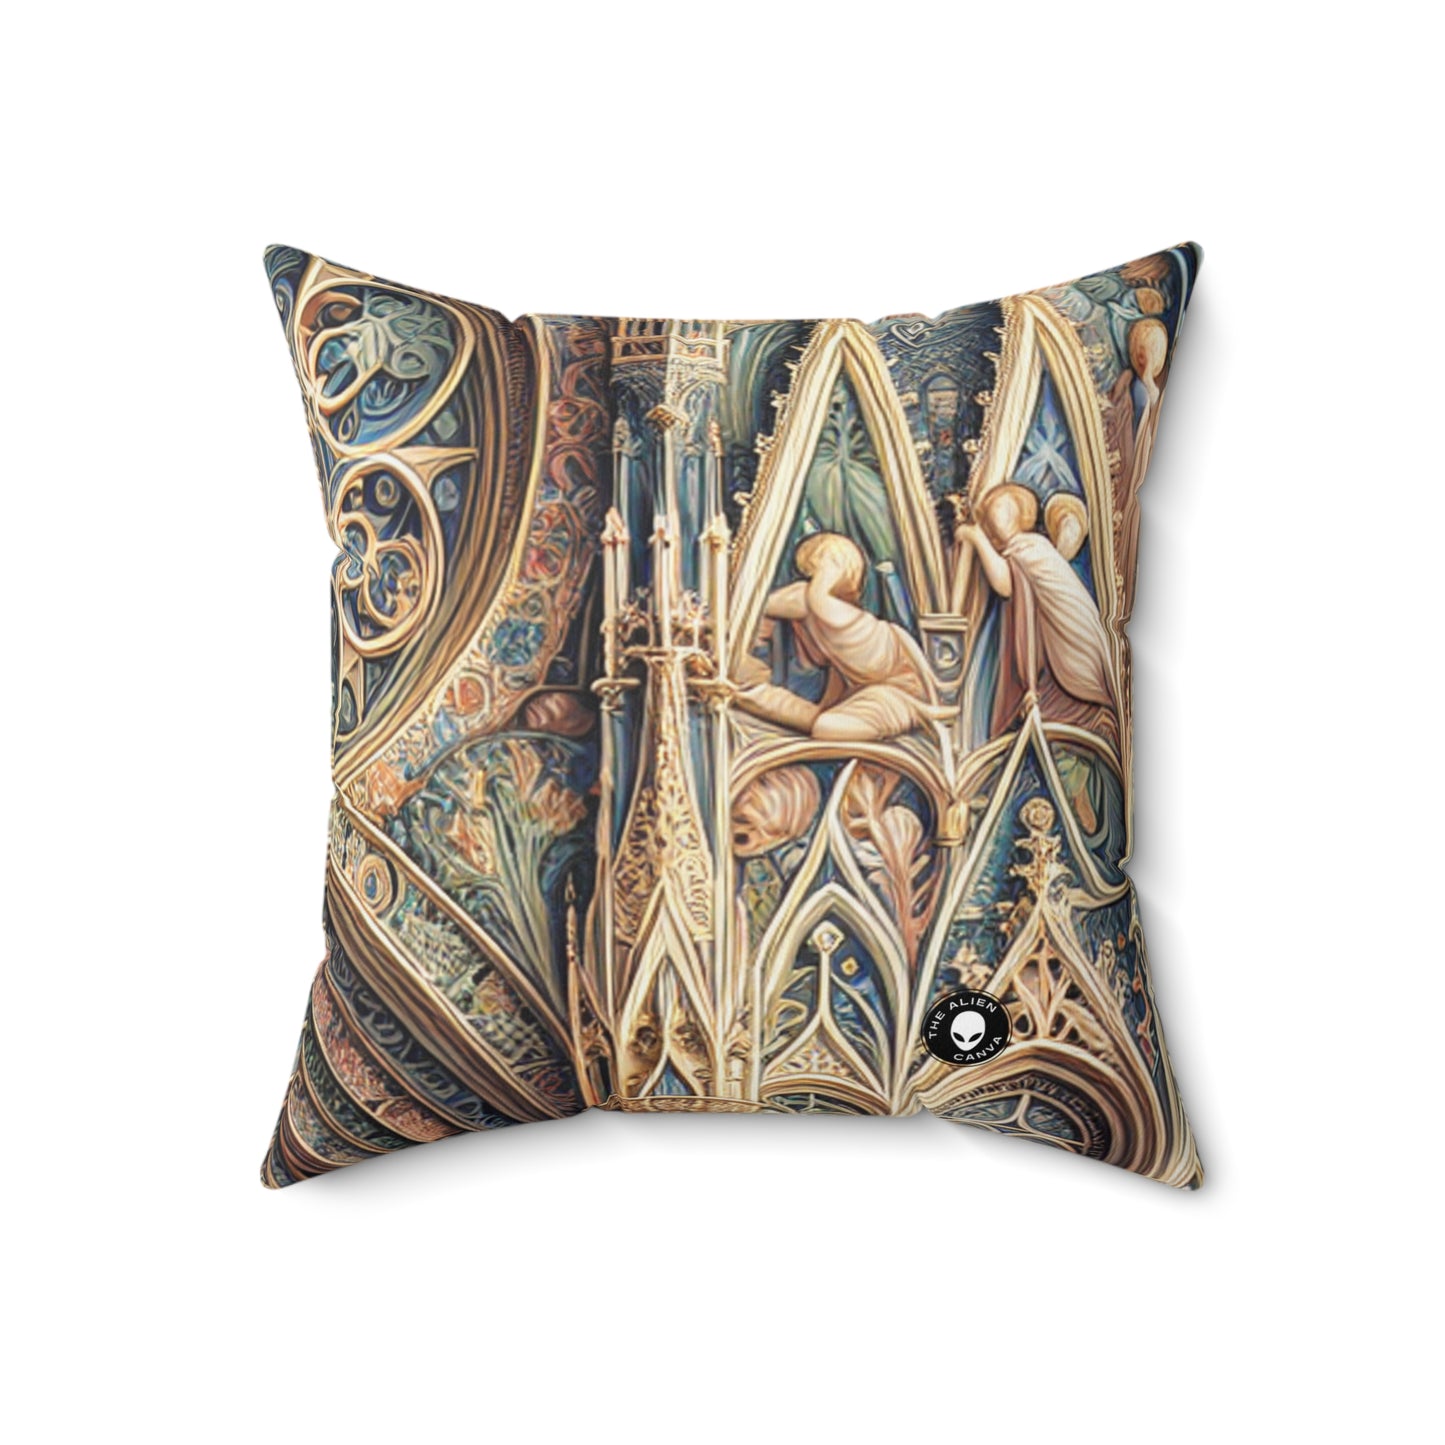 "Harmony of Angels: Celestial Serenade at Dusk"- The Alien Spun Polyester Square Pillow International Gothic